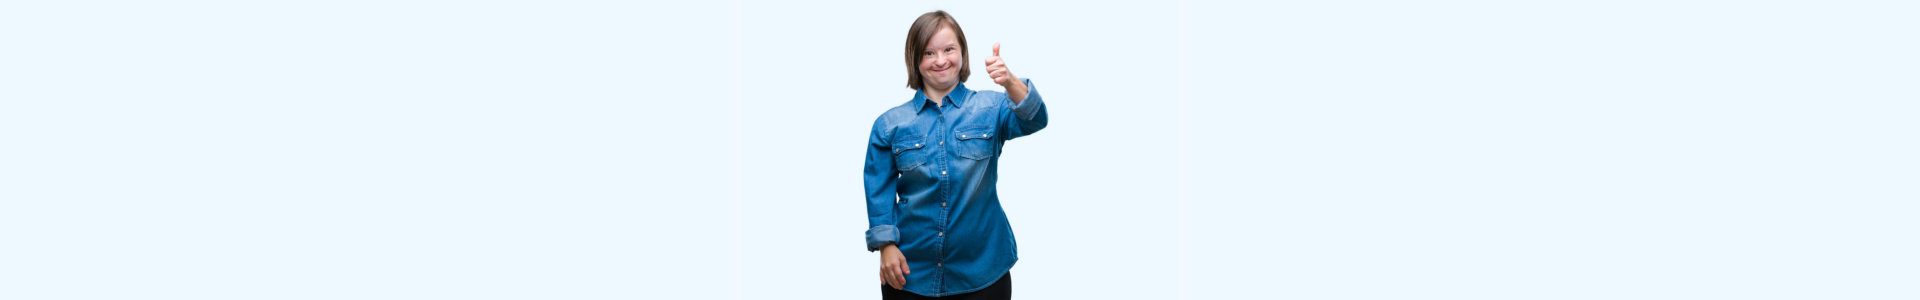 Young adult woman with down syndrome over isolated background doing happy thumbs up gesture with hand